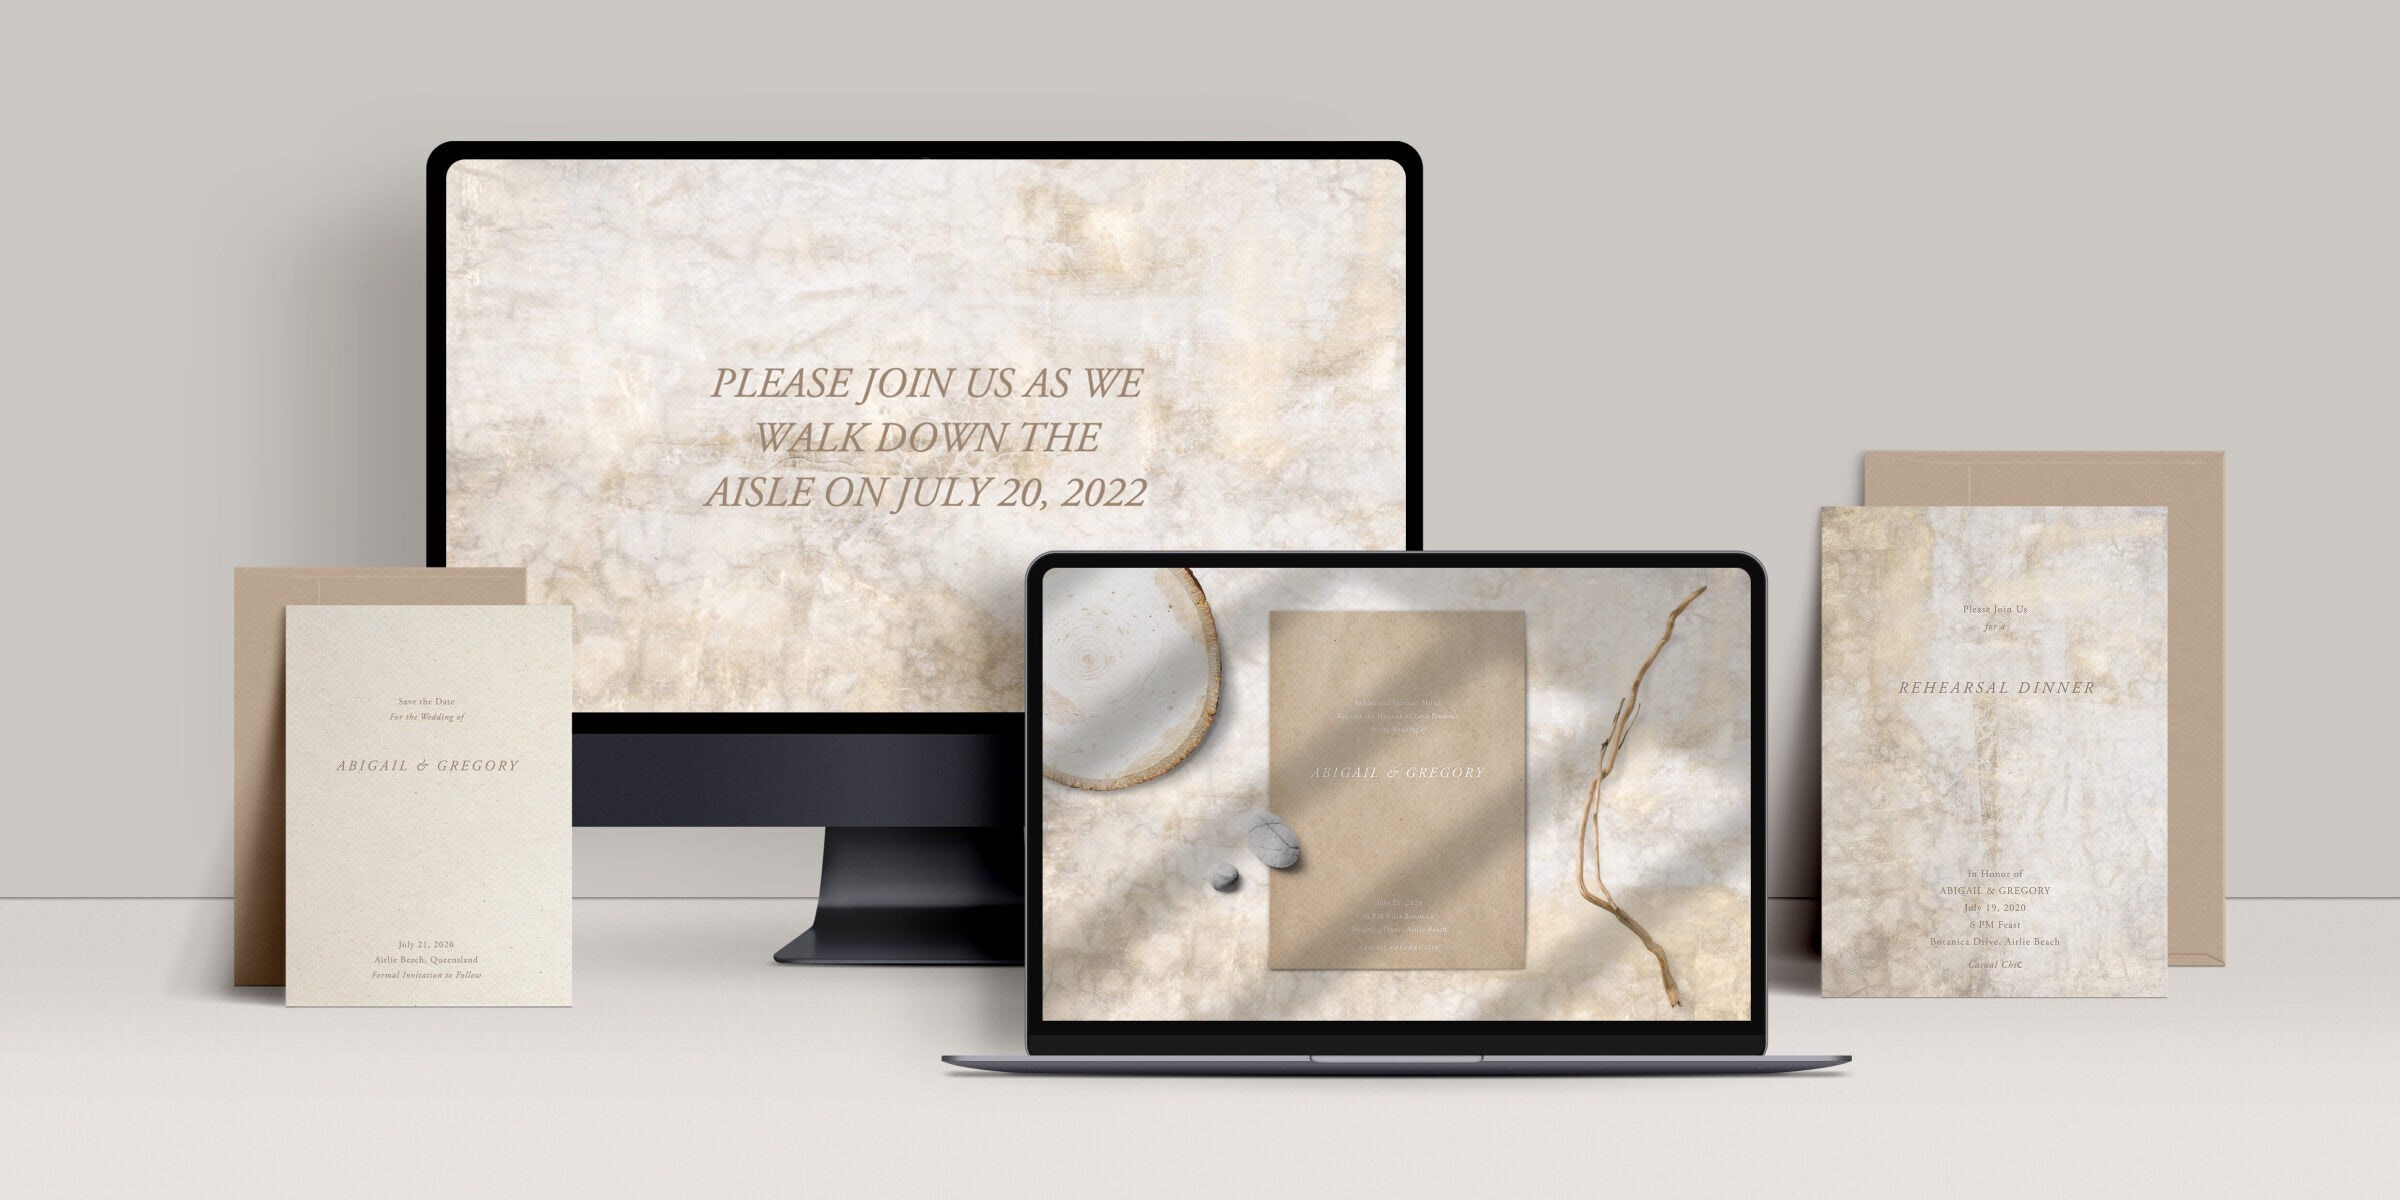 A monitor and laptop screen showing an earthy wedding website and online wedding invitation, plus coordinating printed stationery